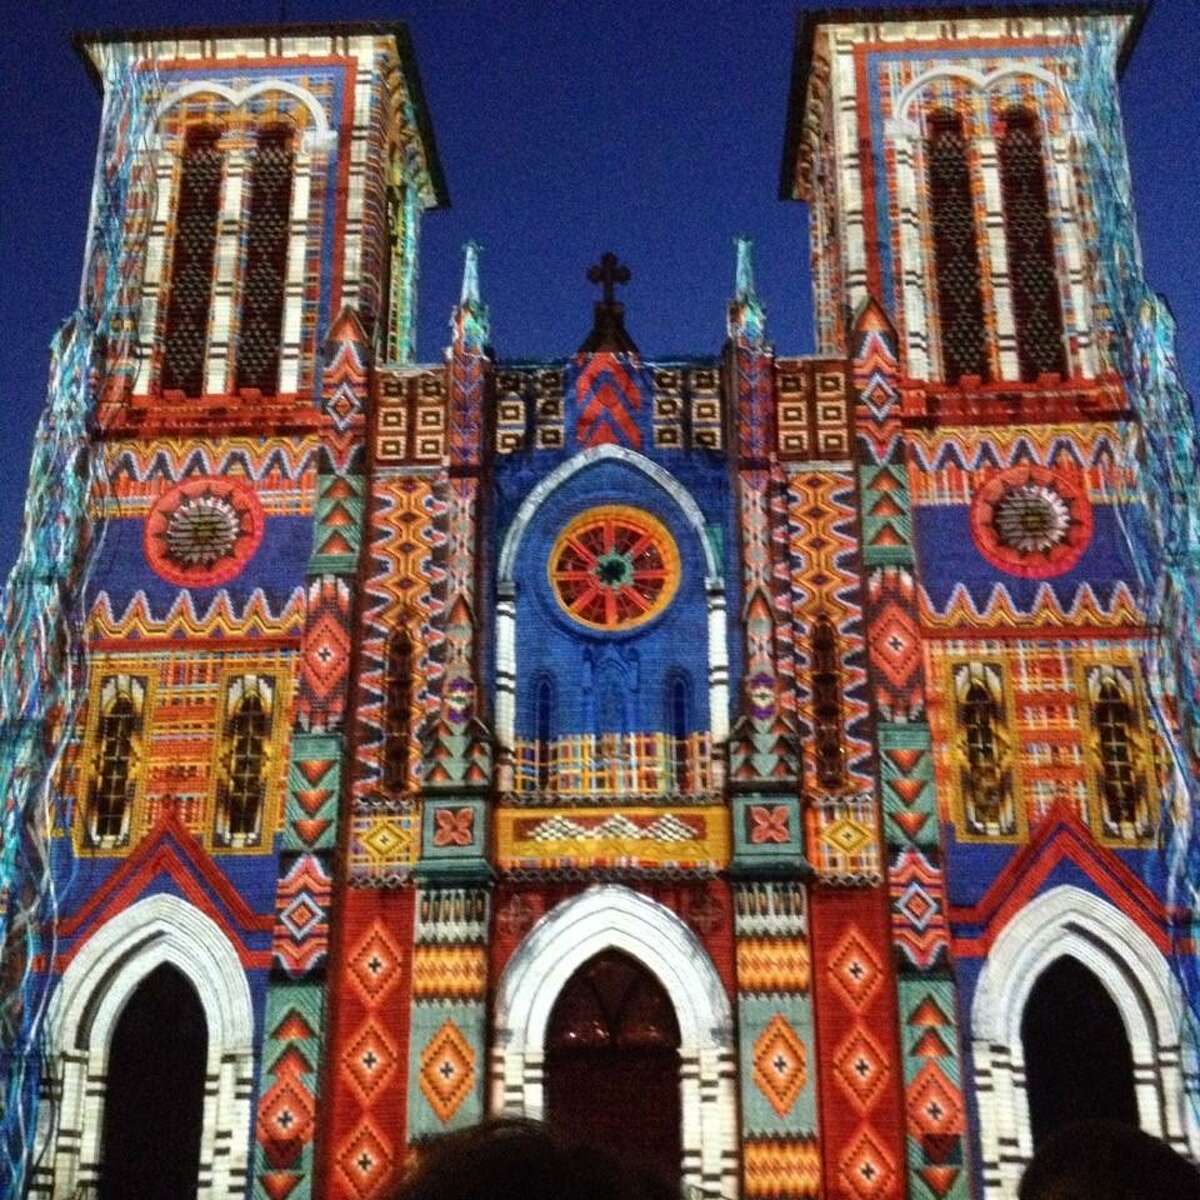 A photo of the downtown art installment “The Saga” projected on San Fernando Cathedral.